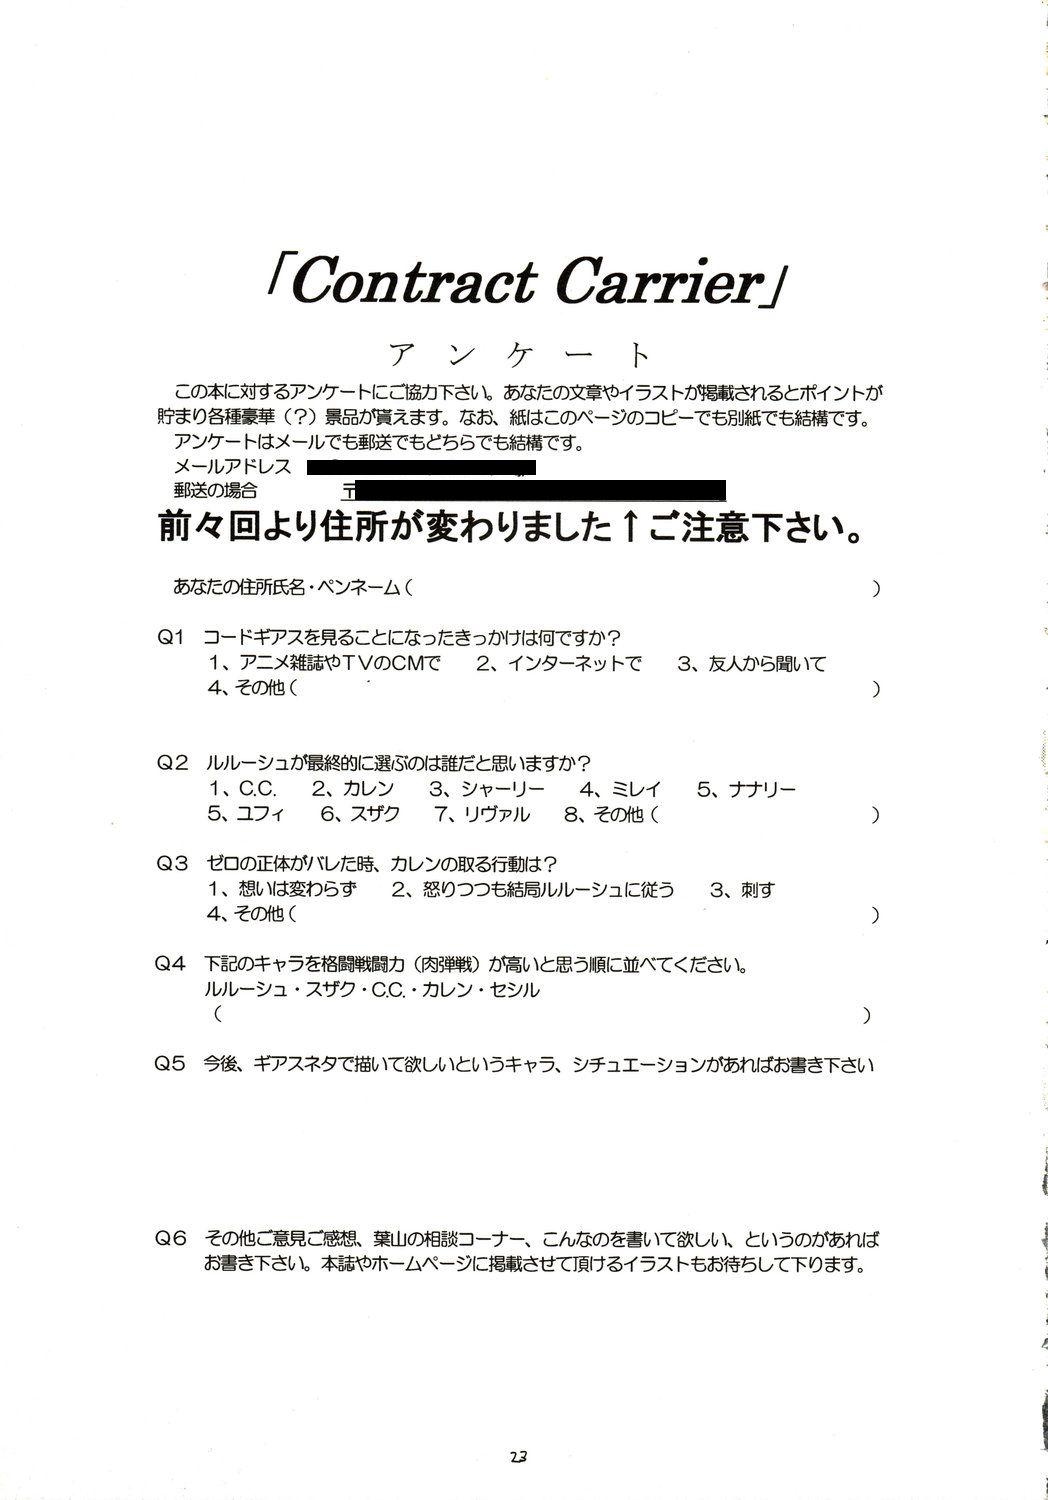 Contract Carrier 20